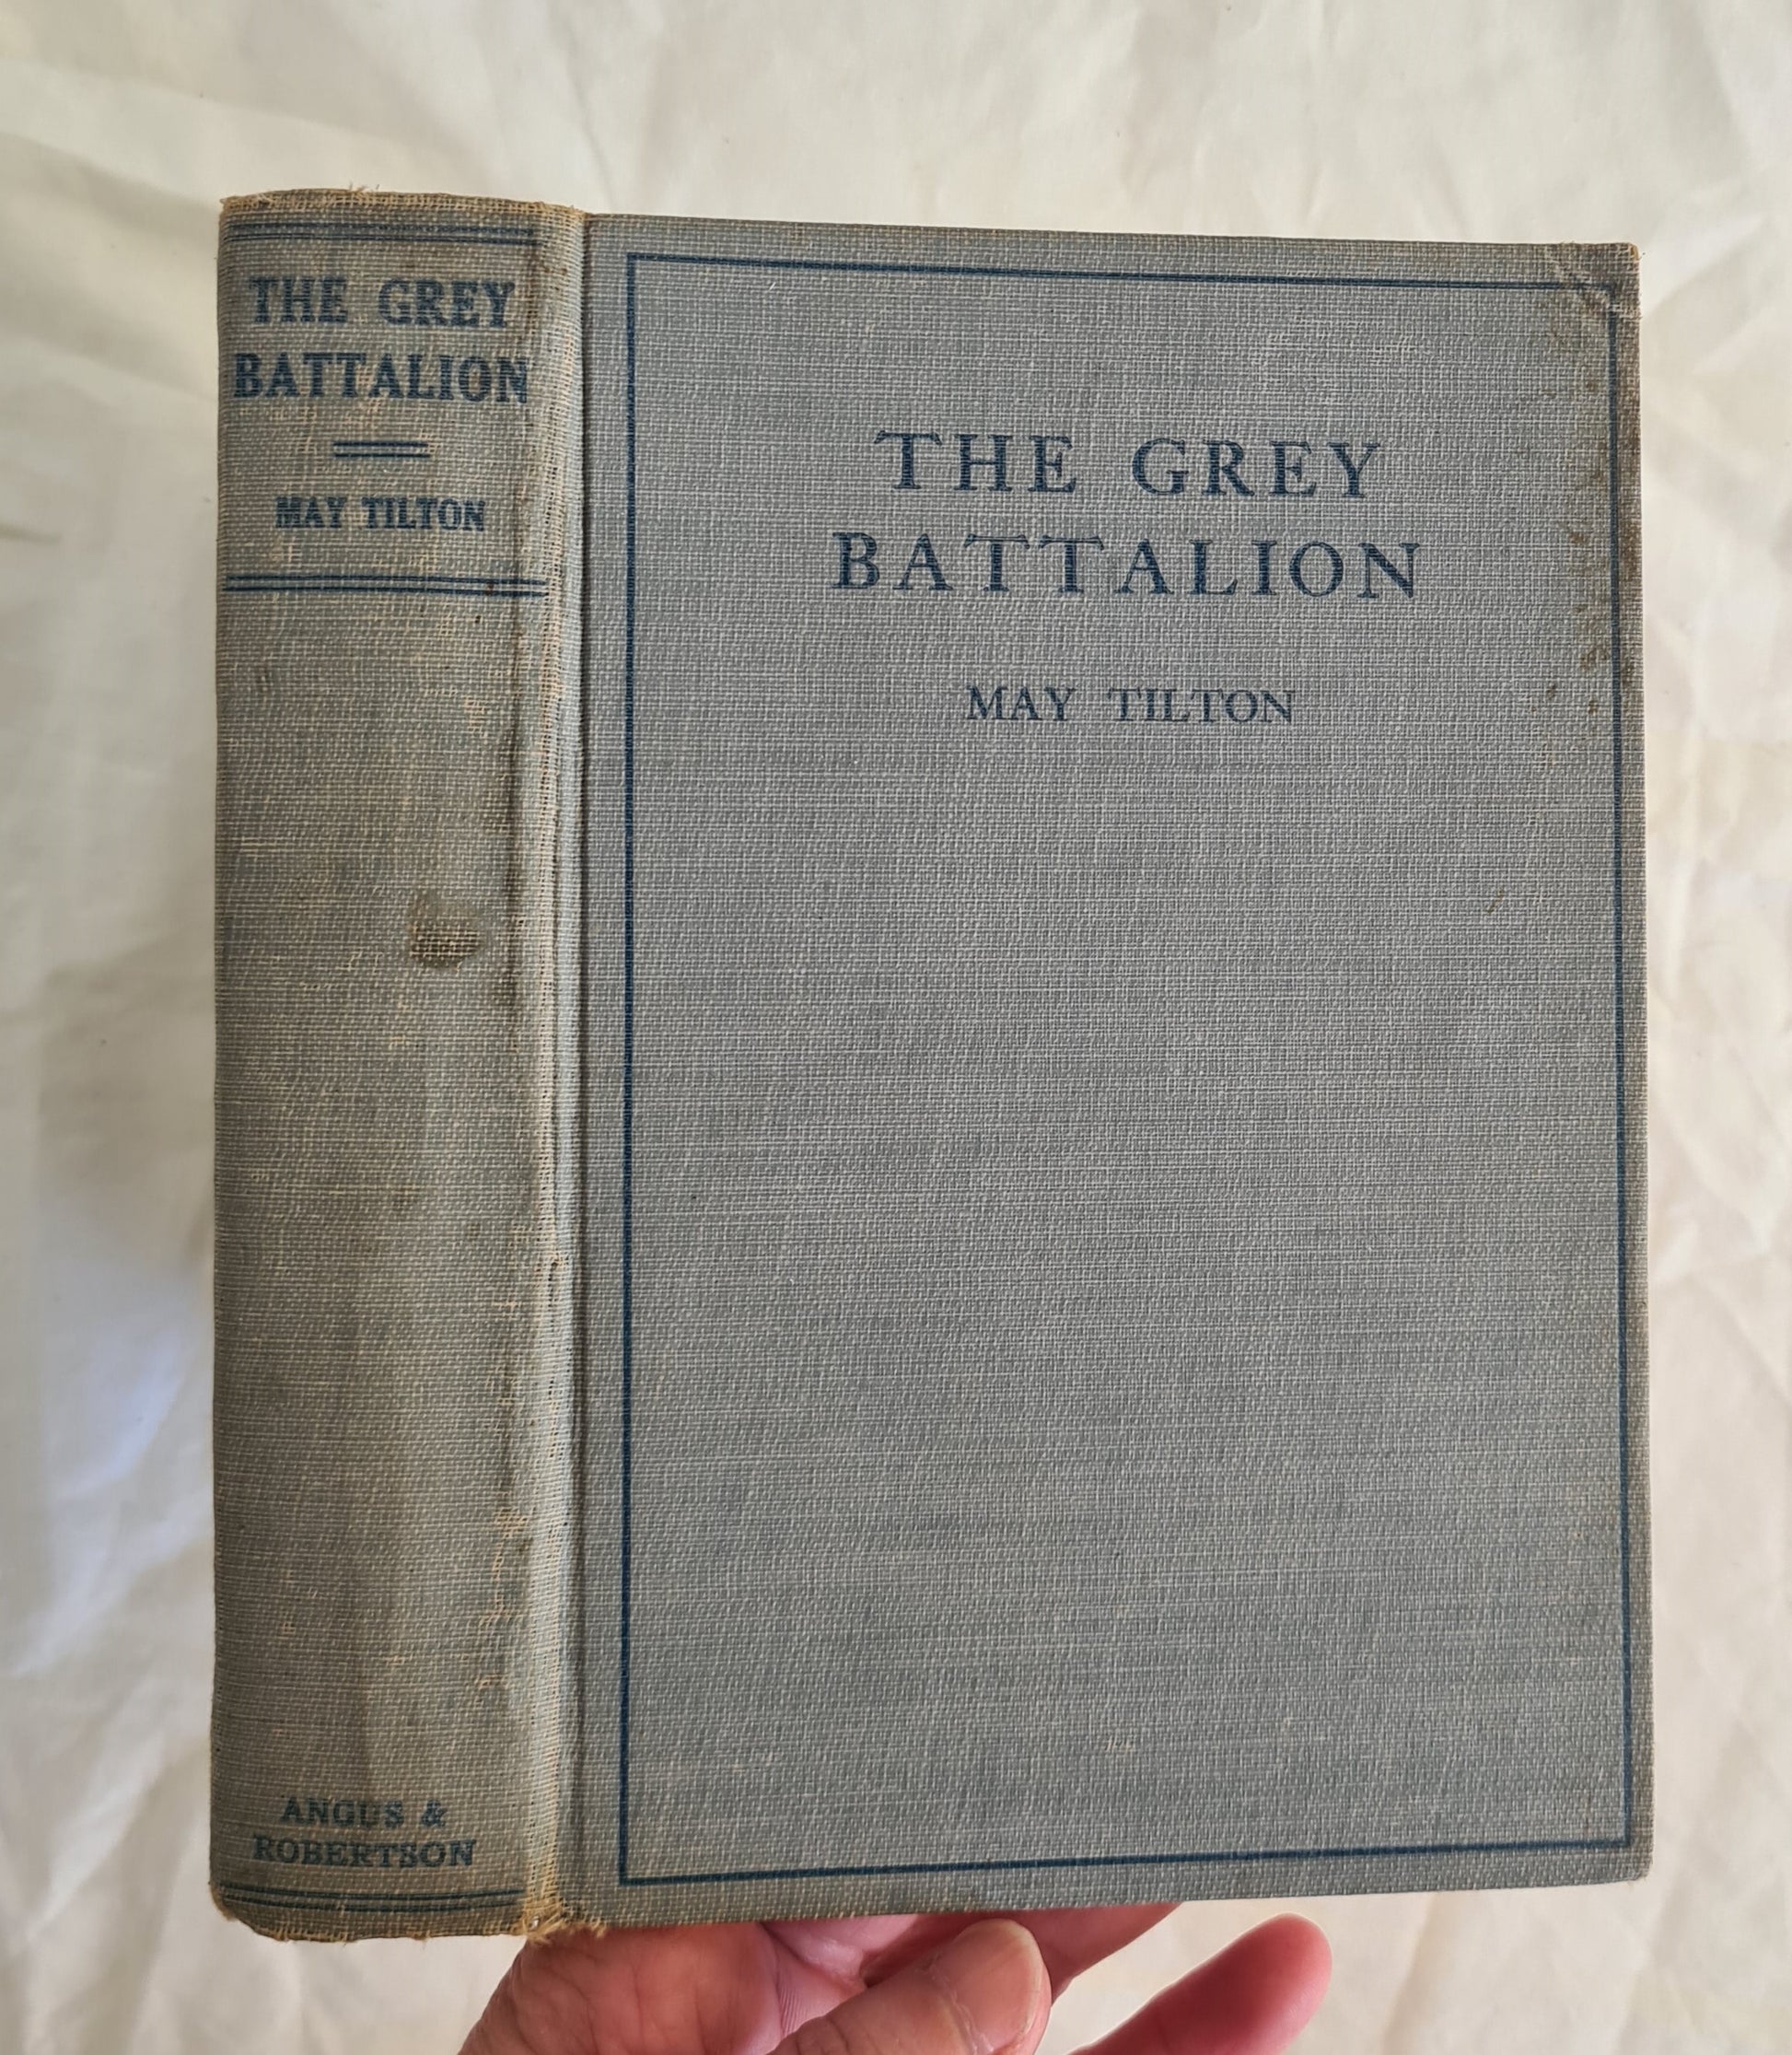 The Grey Battalion by May Tilton